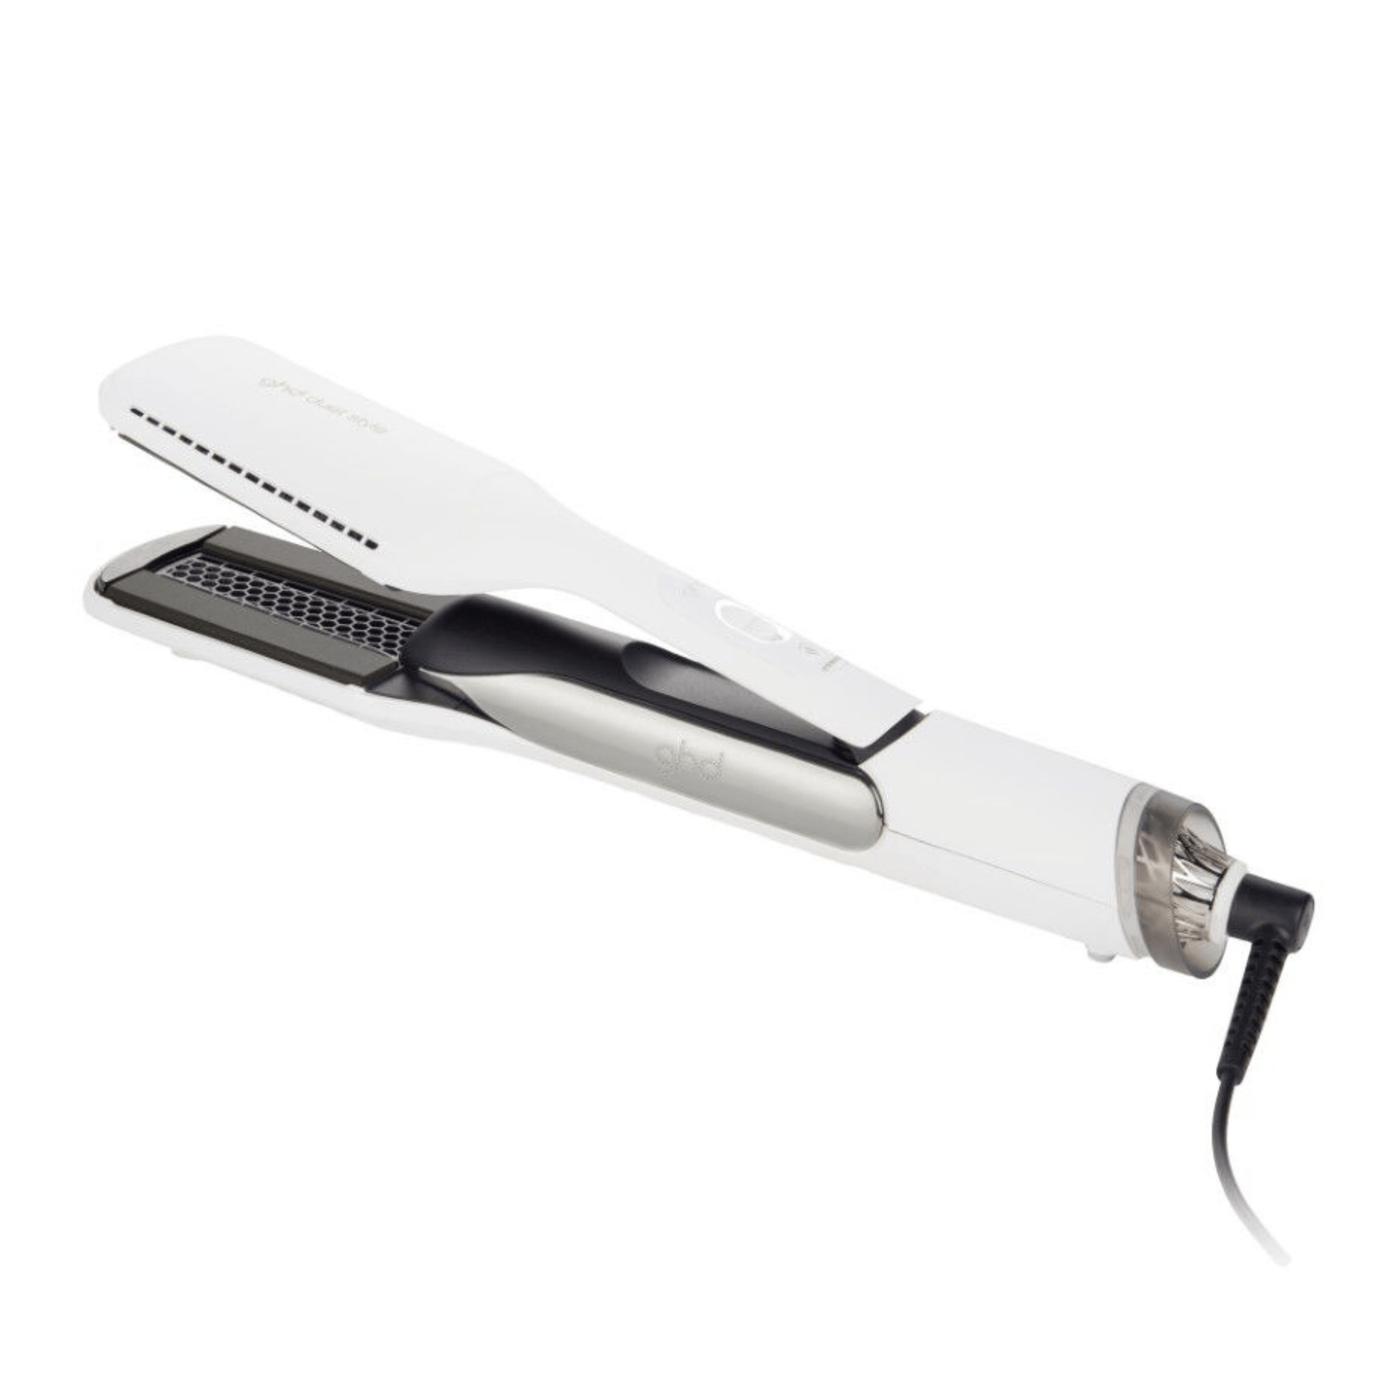 ghd Electricals GHD DUET STYLE HOT AIR STYLER IN WHITE